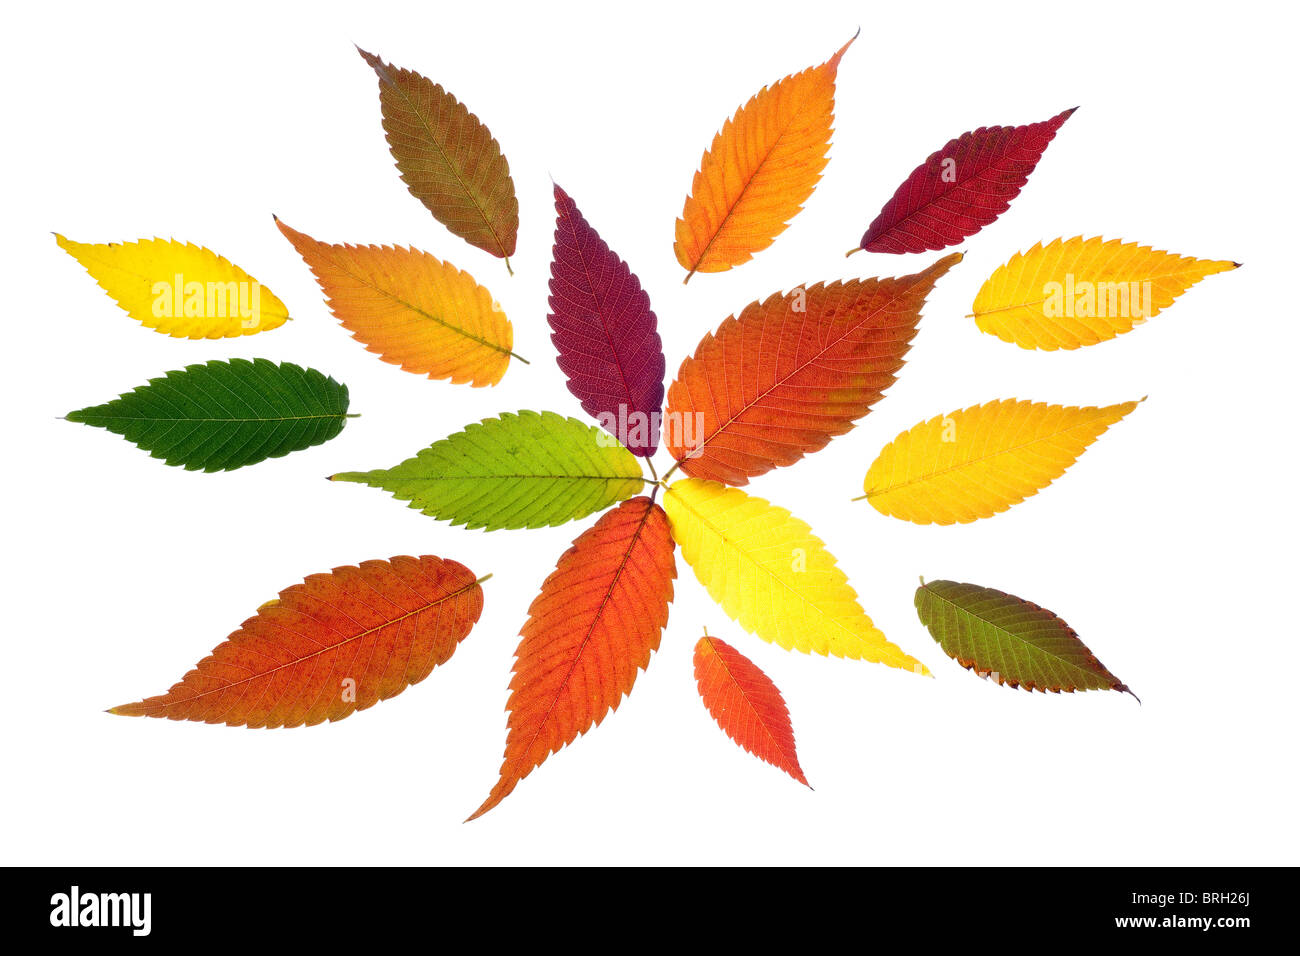 vivid and colorful autumn leaves isolated on white background Stock Photo